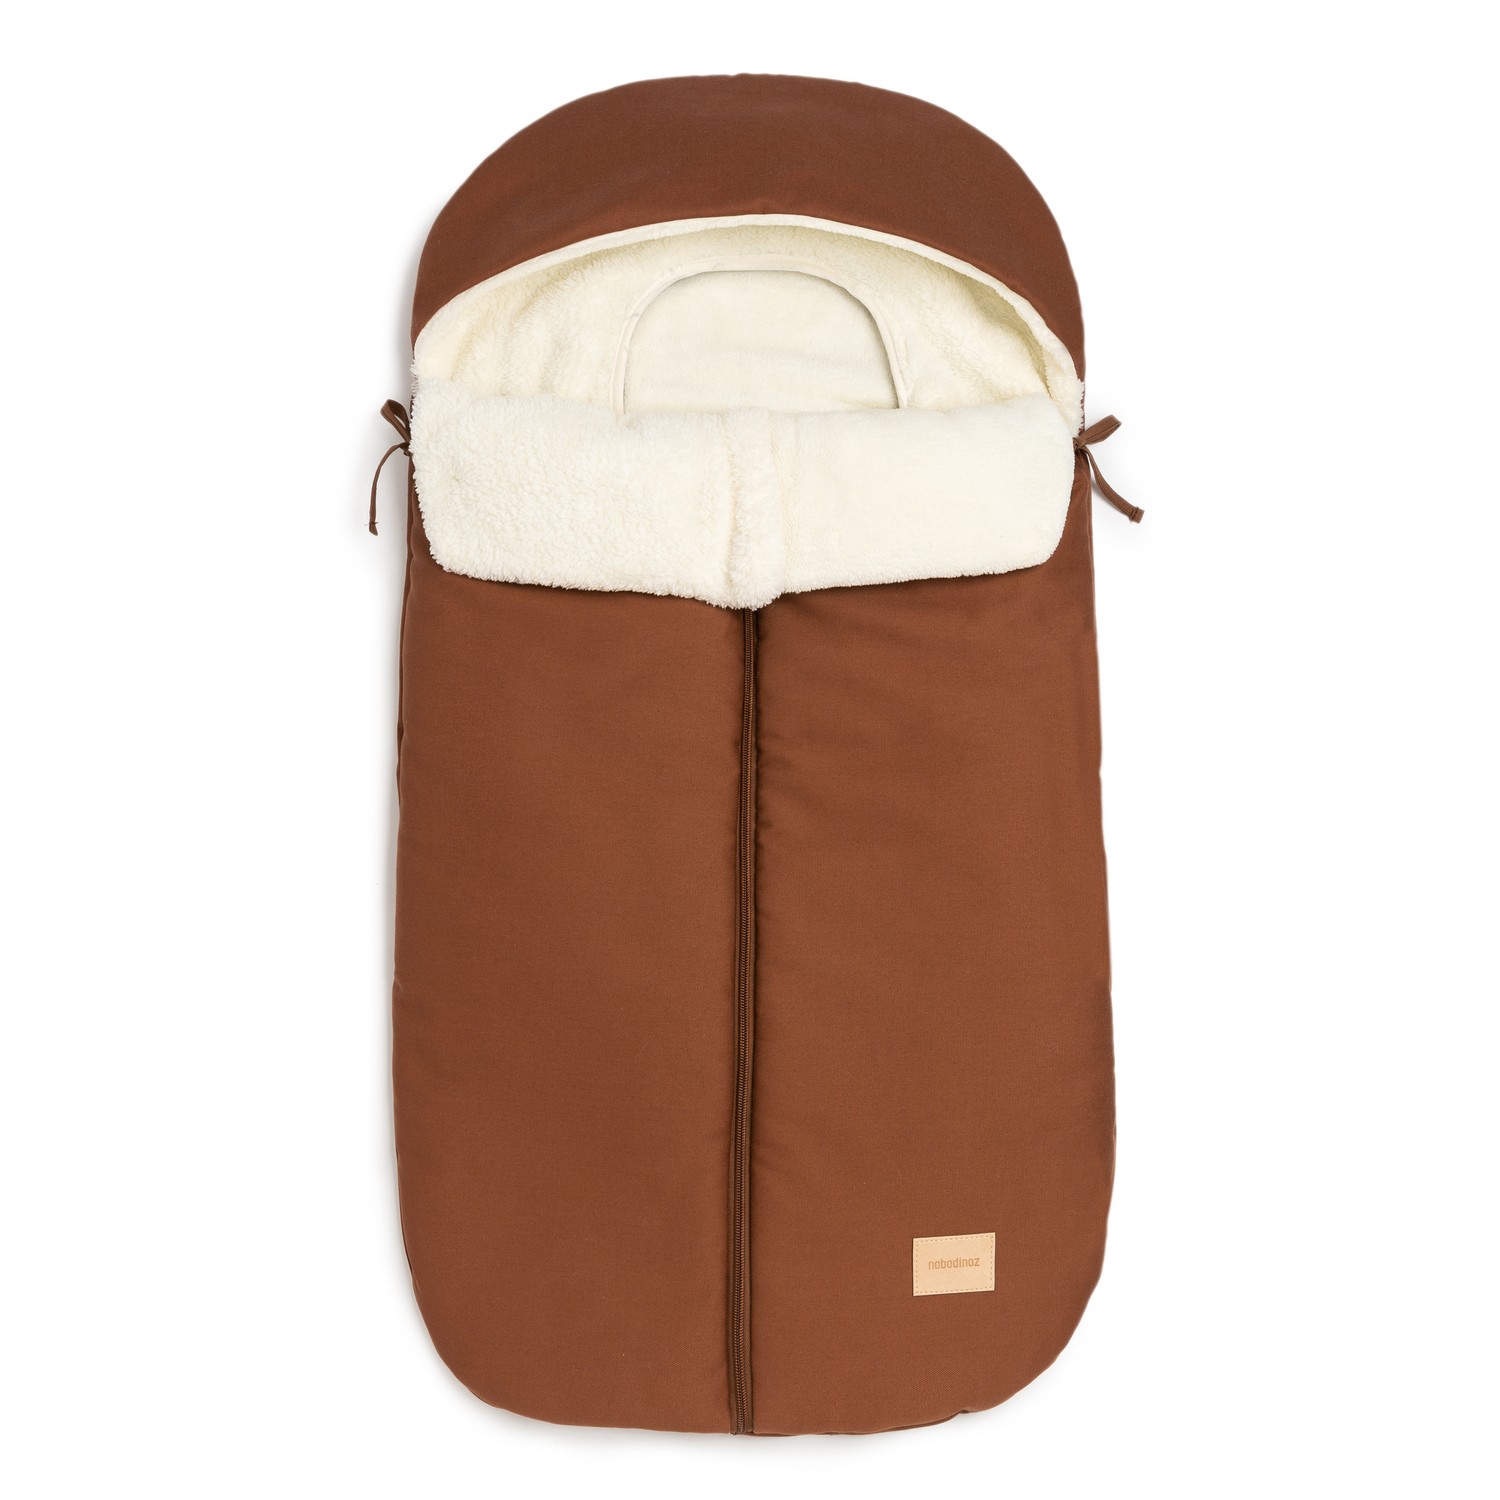 chanceliere-baby-on-the-go-clay-brown-nobodinoz.0h5pxm.max